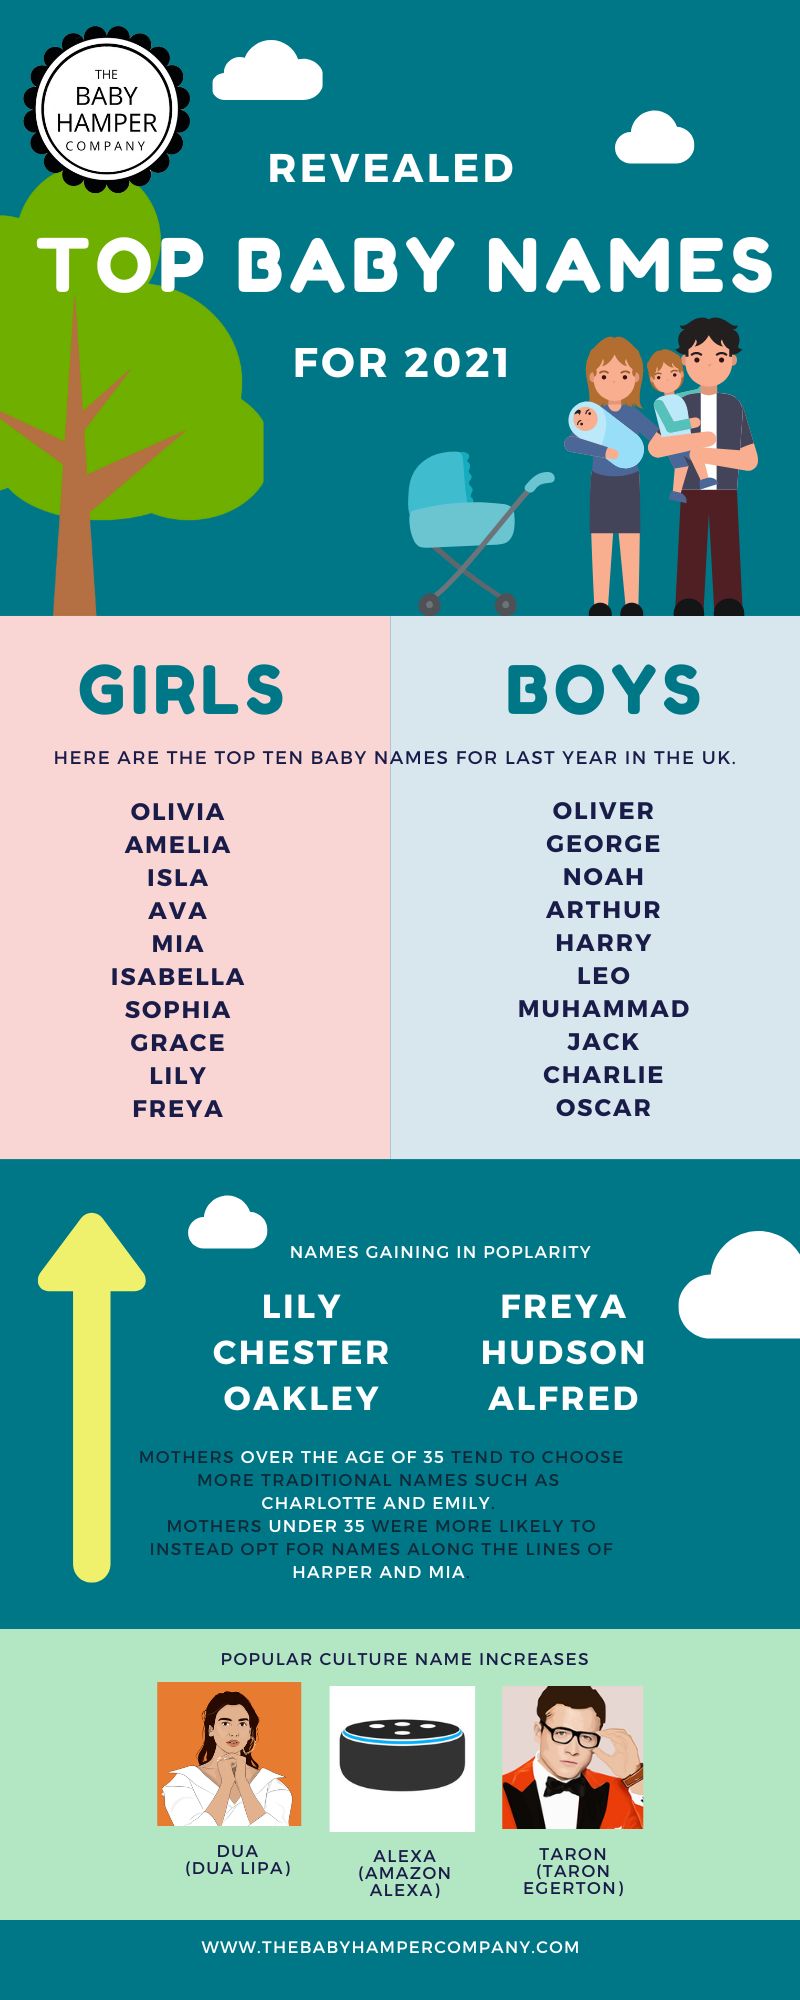 Top baby names for 2021